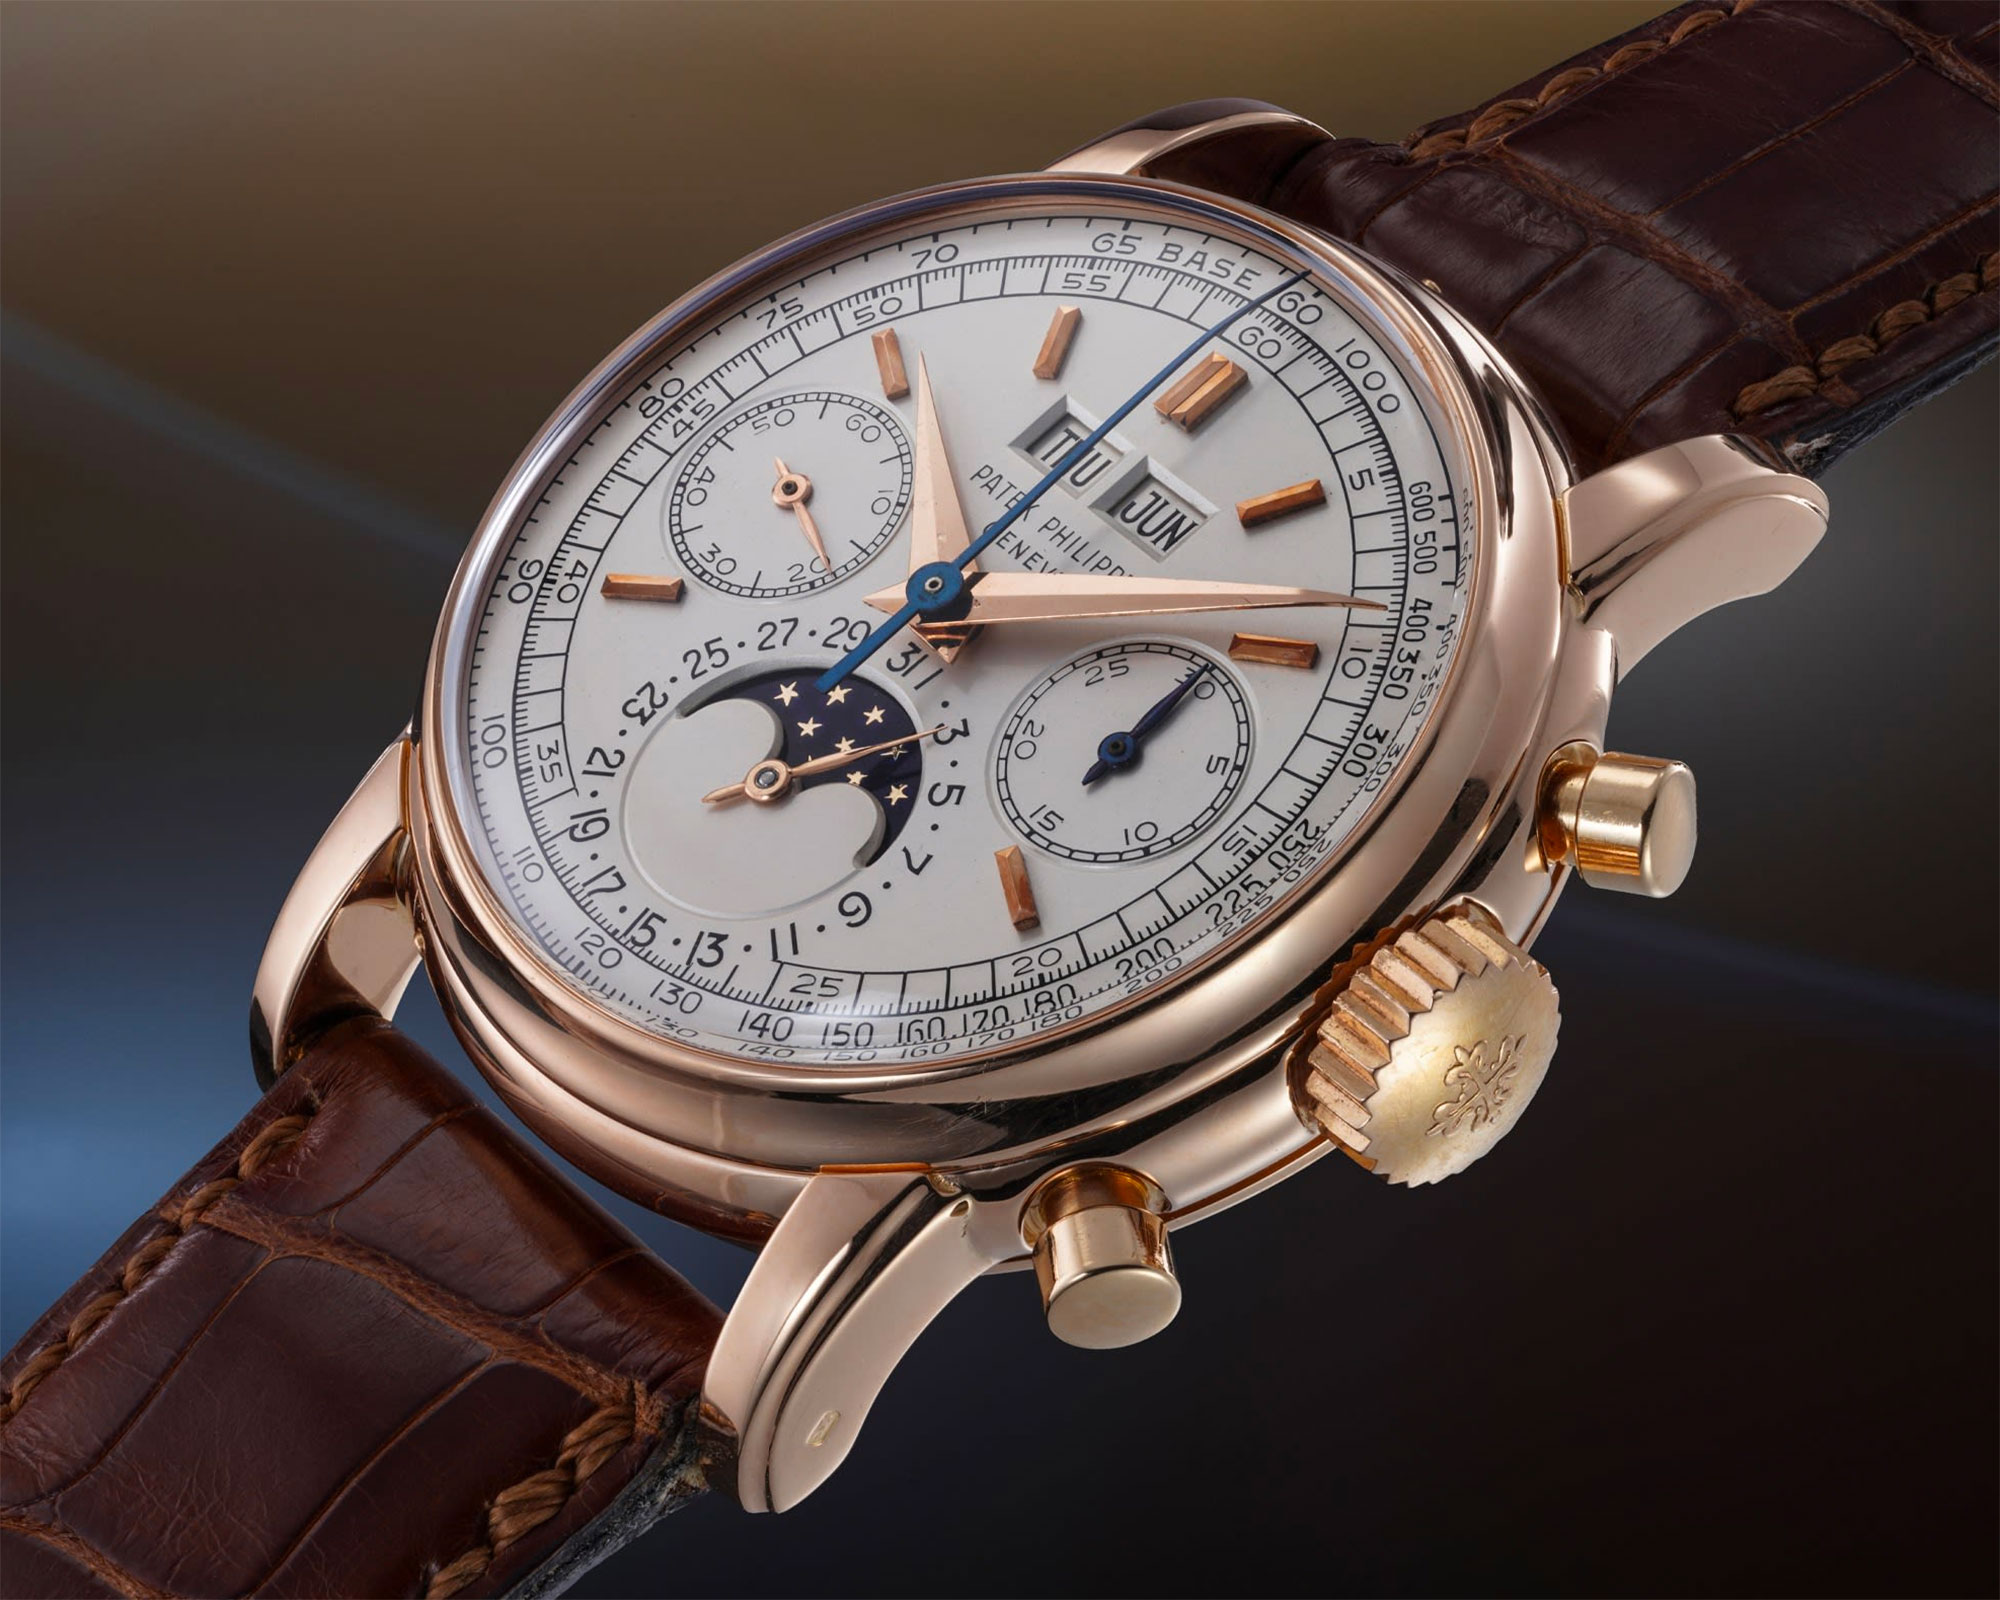 Top Lots of the Phillips Auction: The Geneva Watch Auction: XVII ...